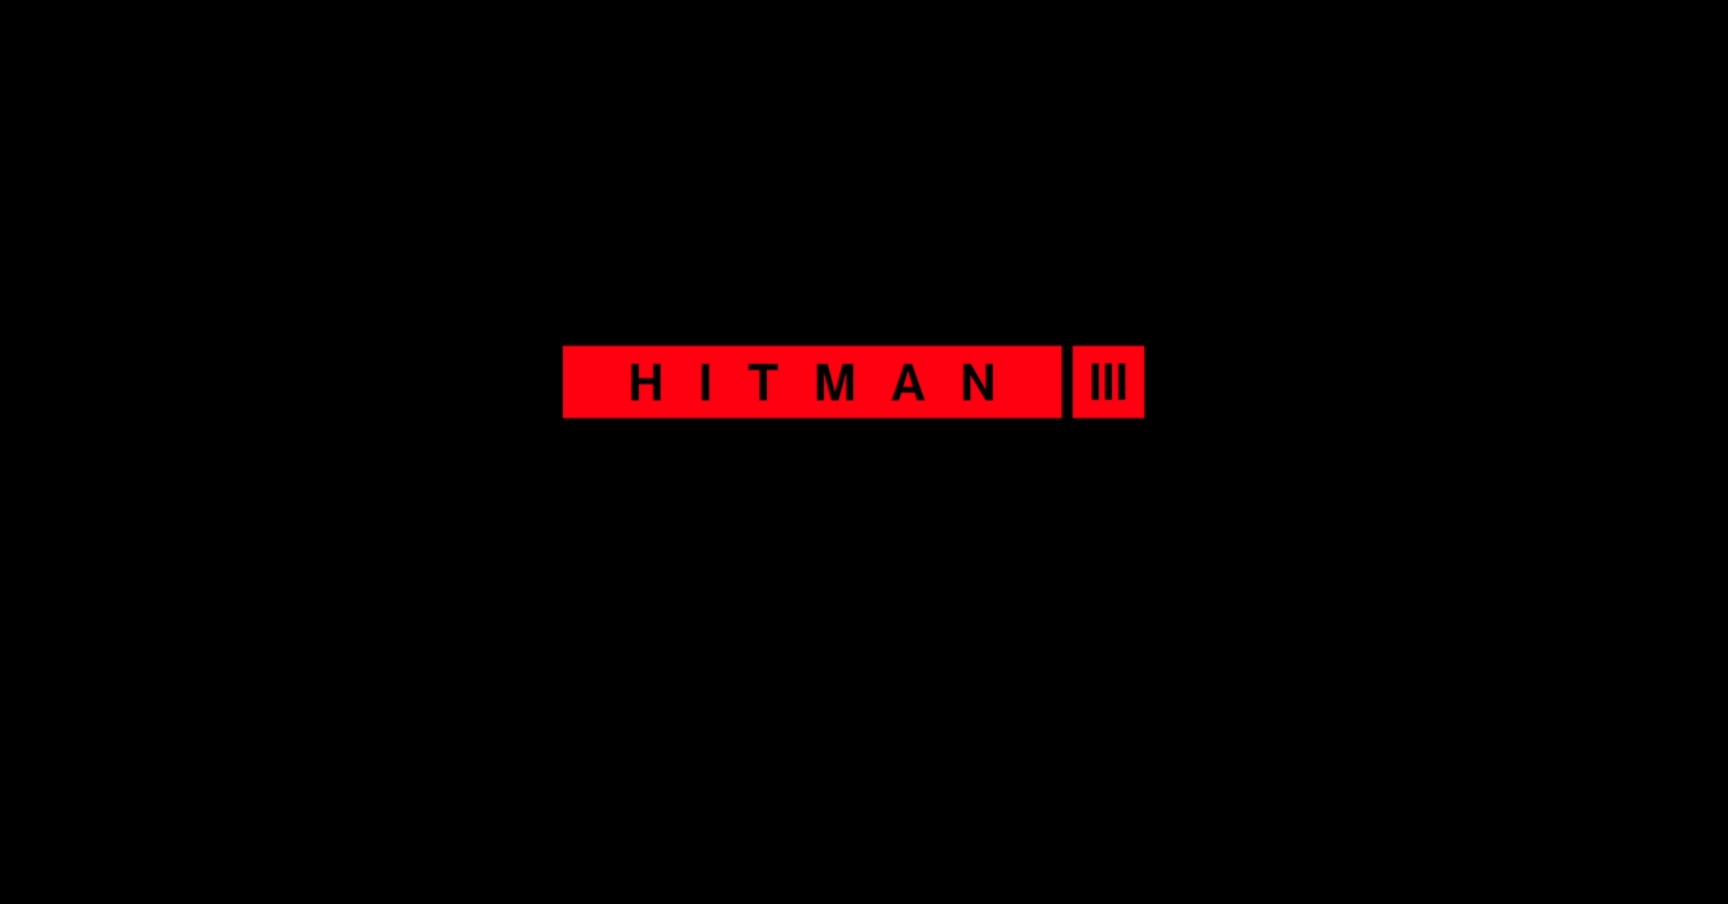  All game modes coming to Hitman 3 